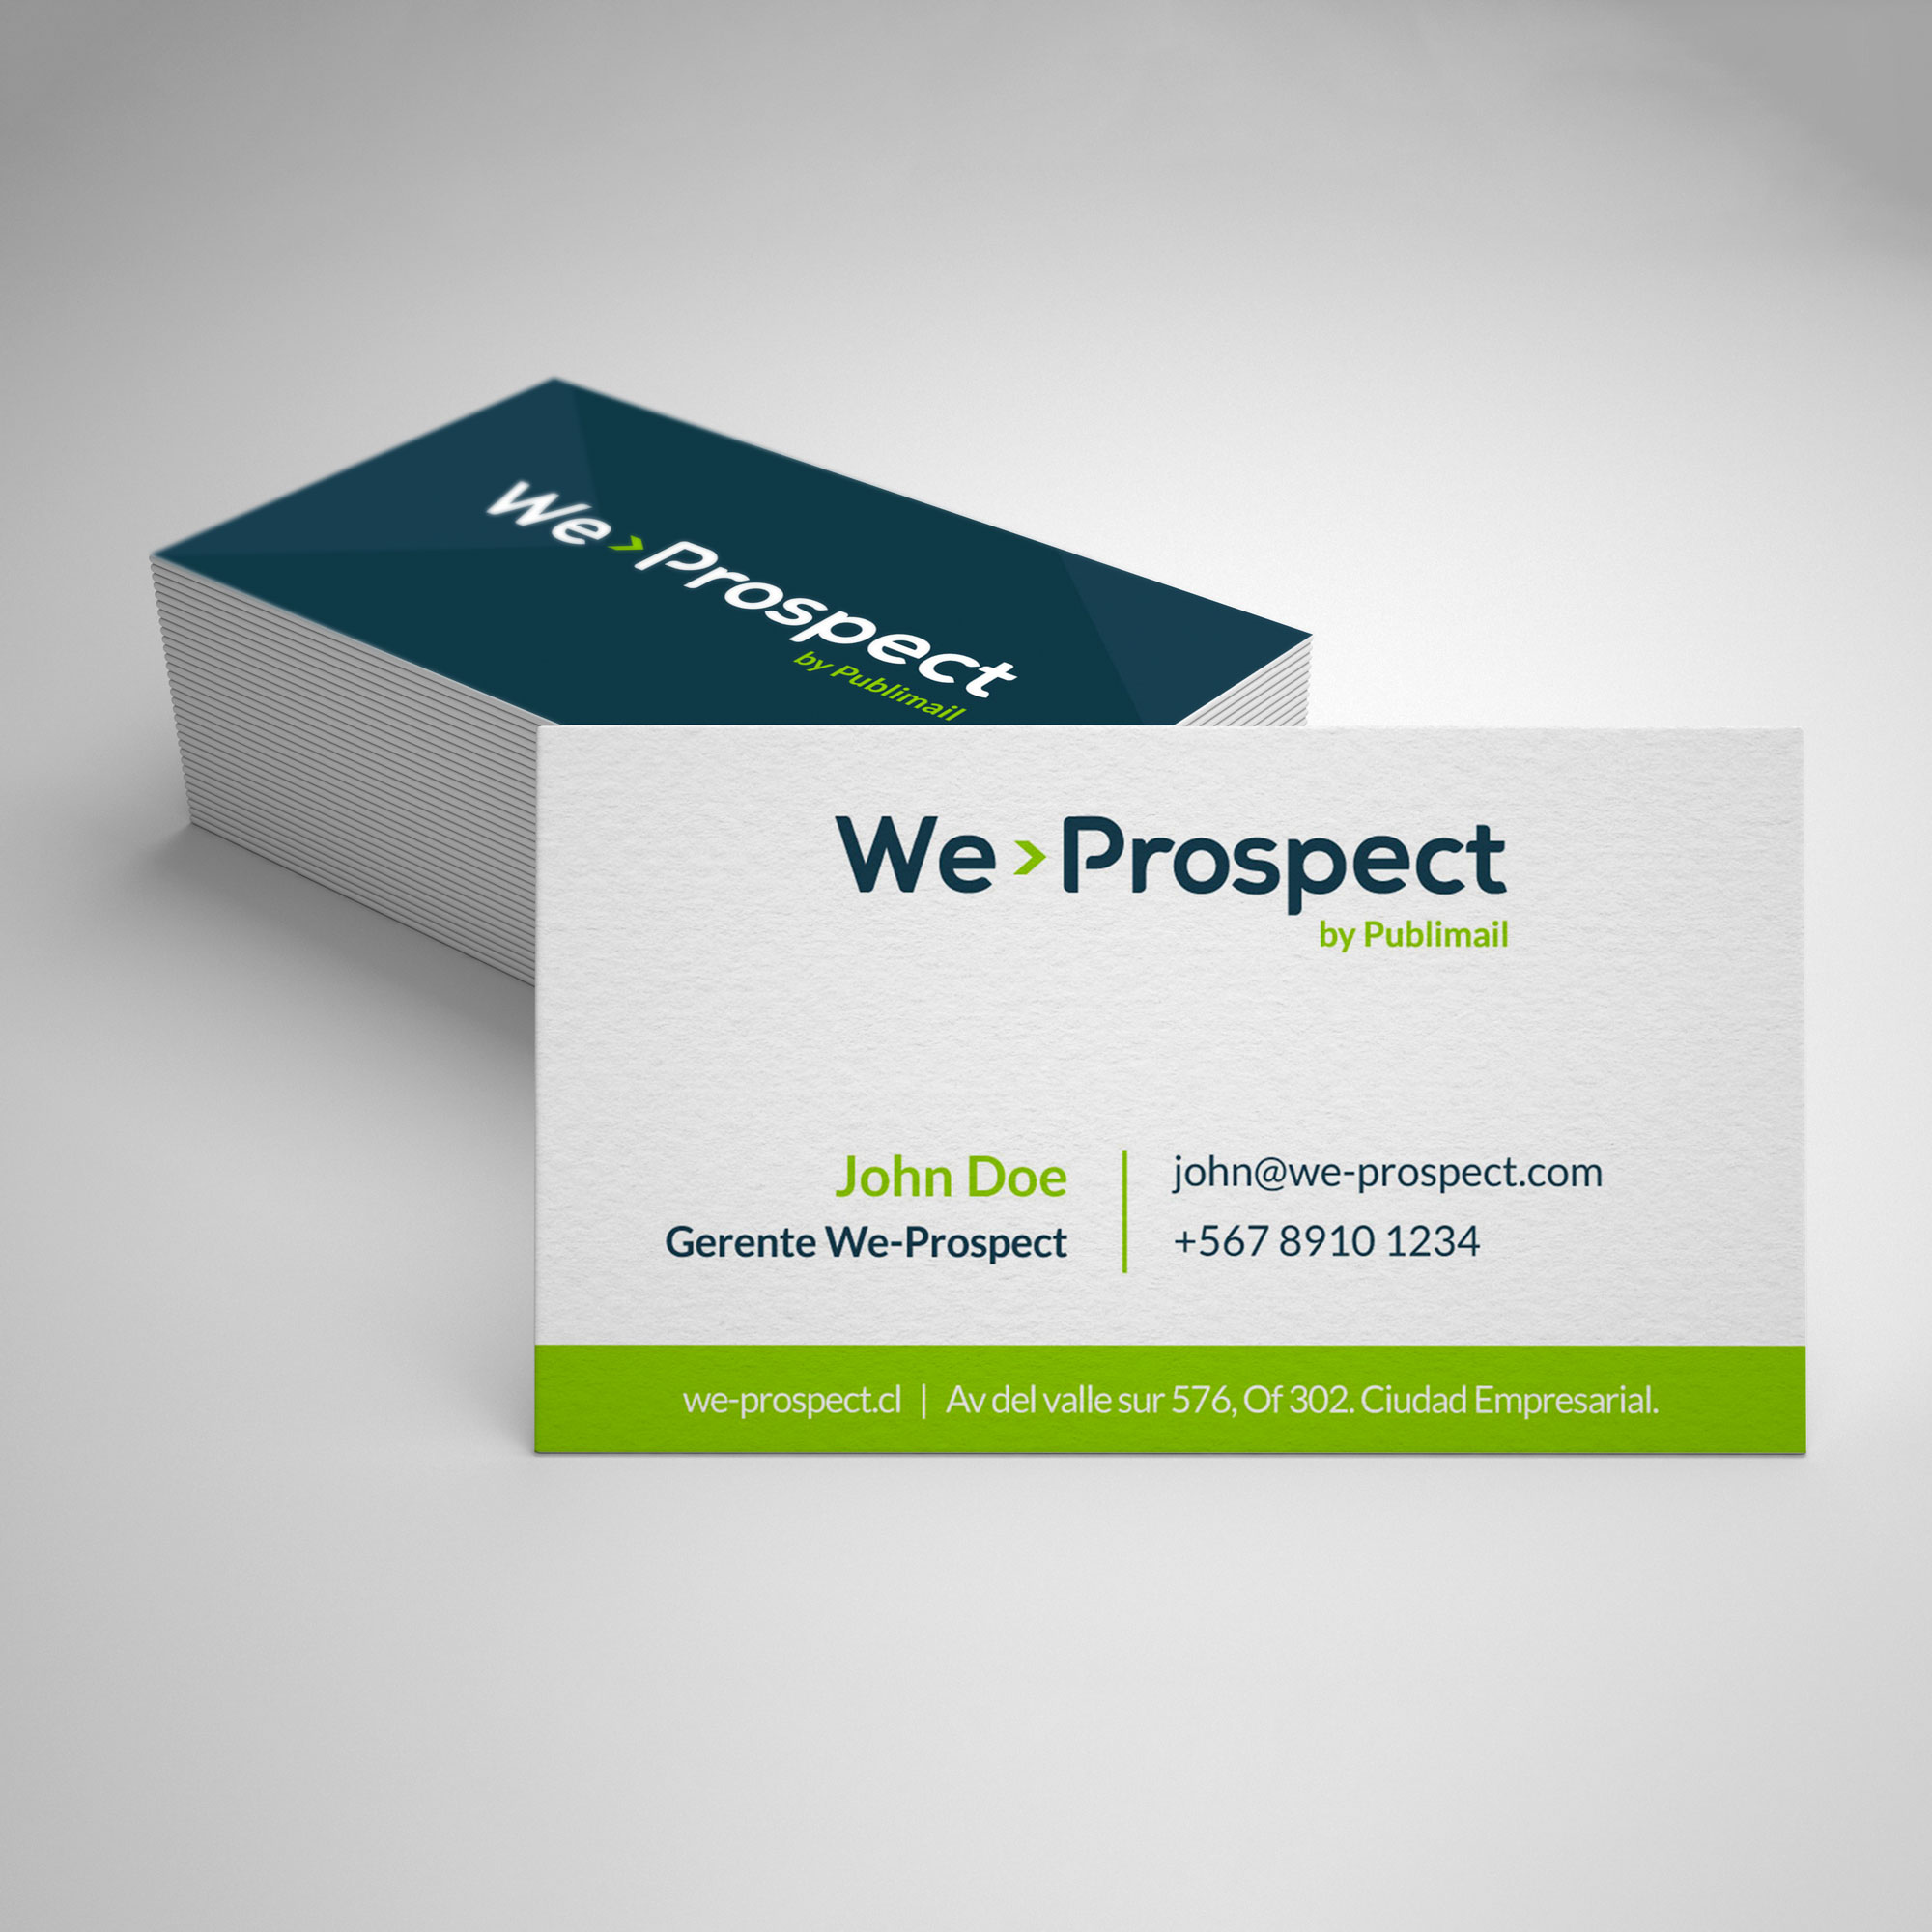 Business Cards “We-Prospect”